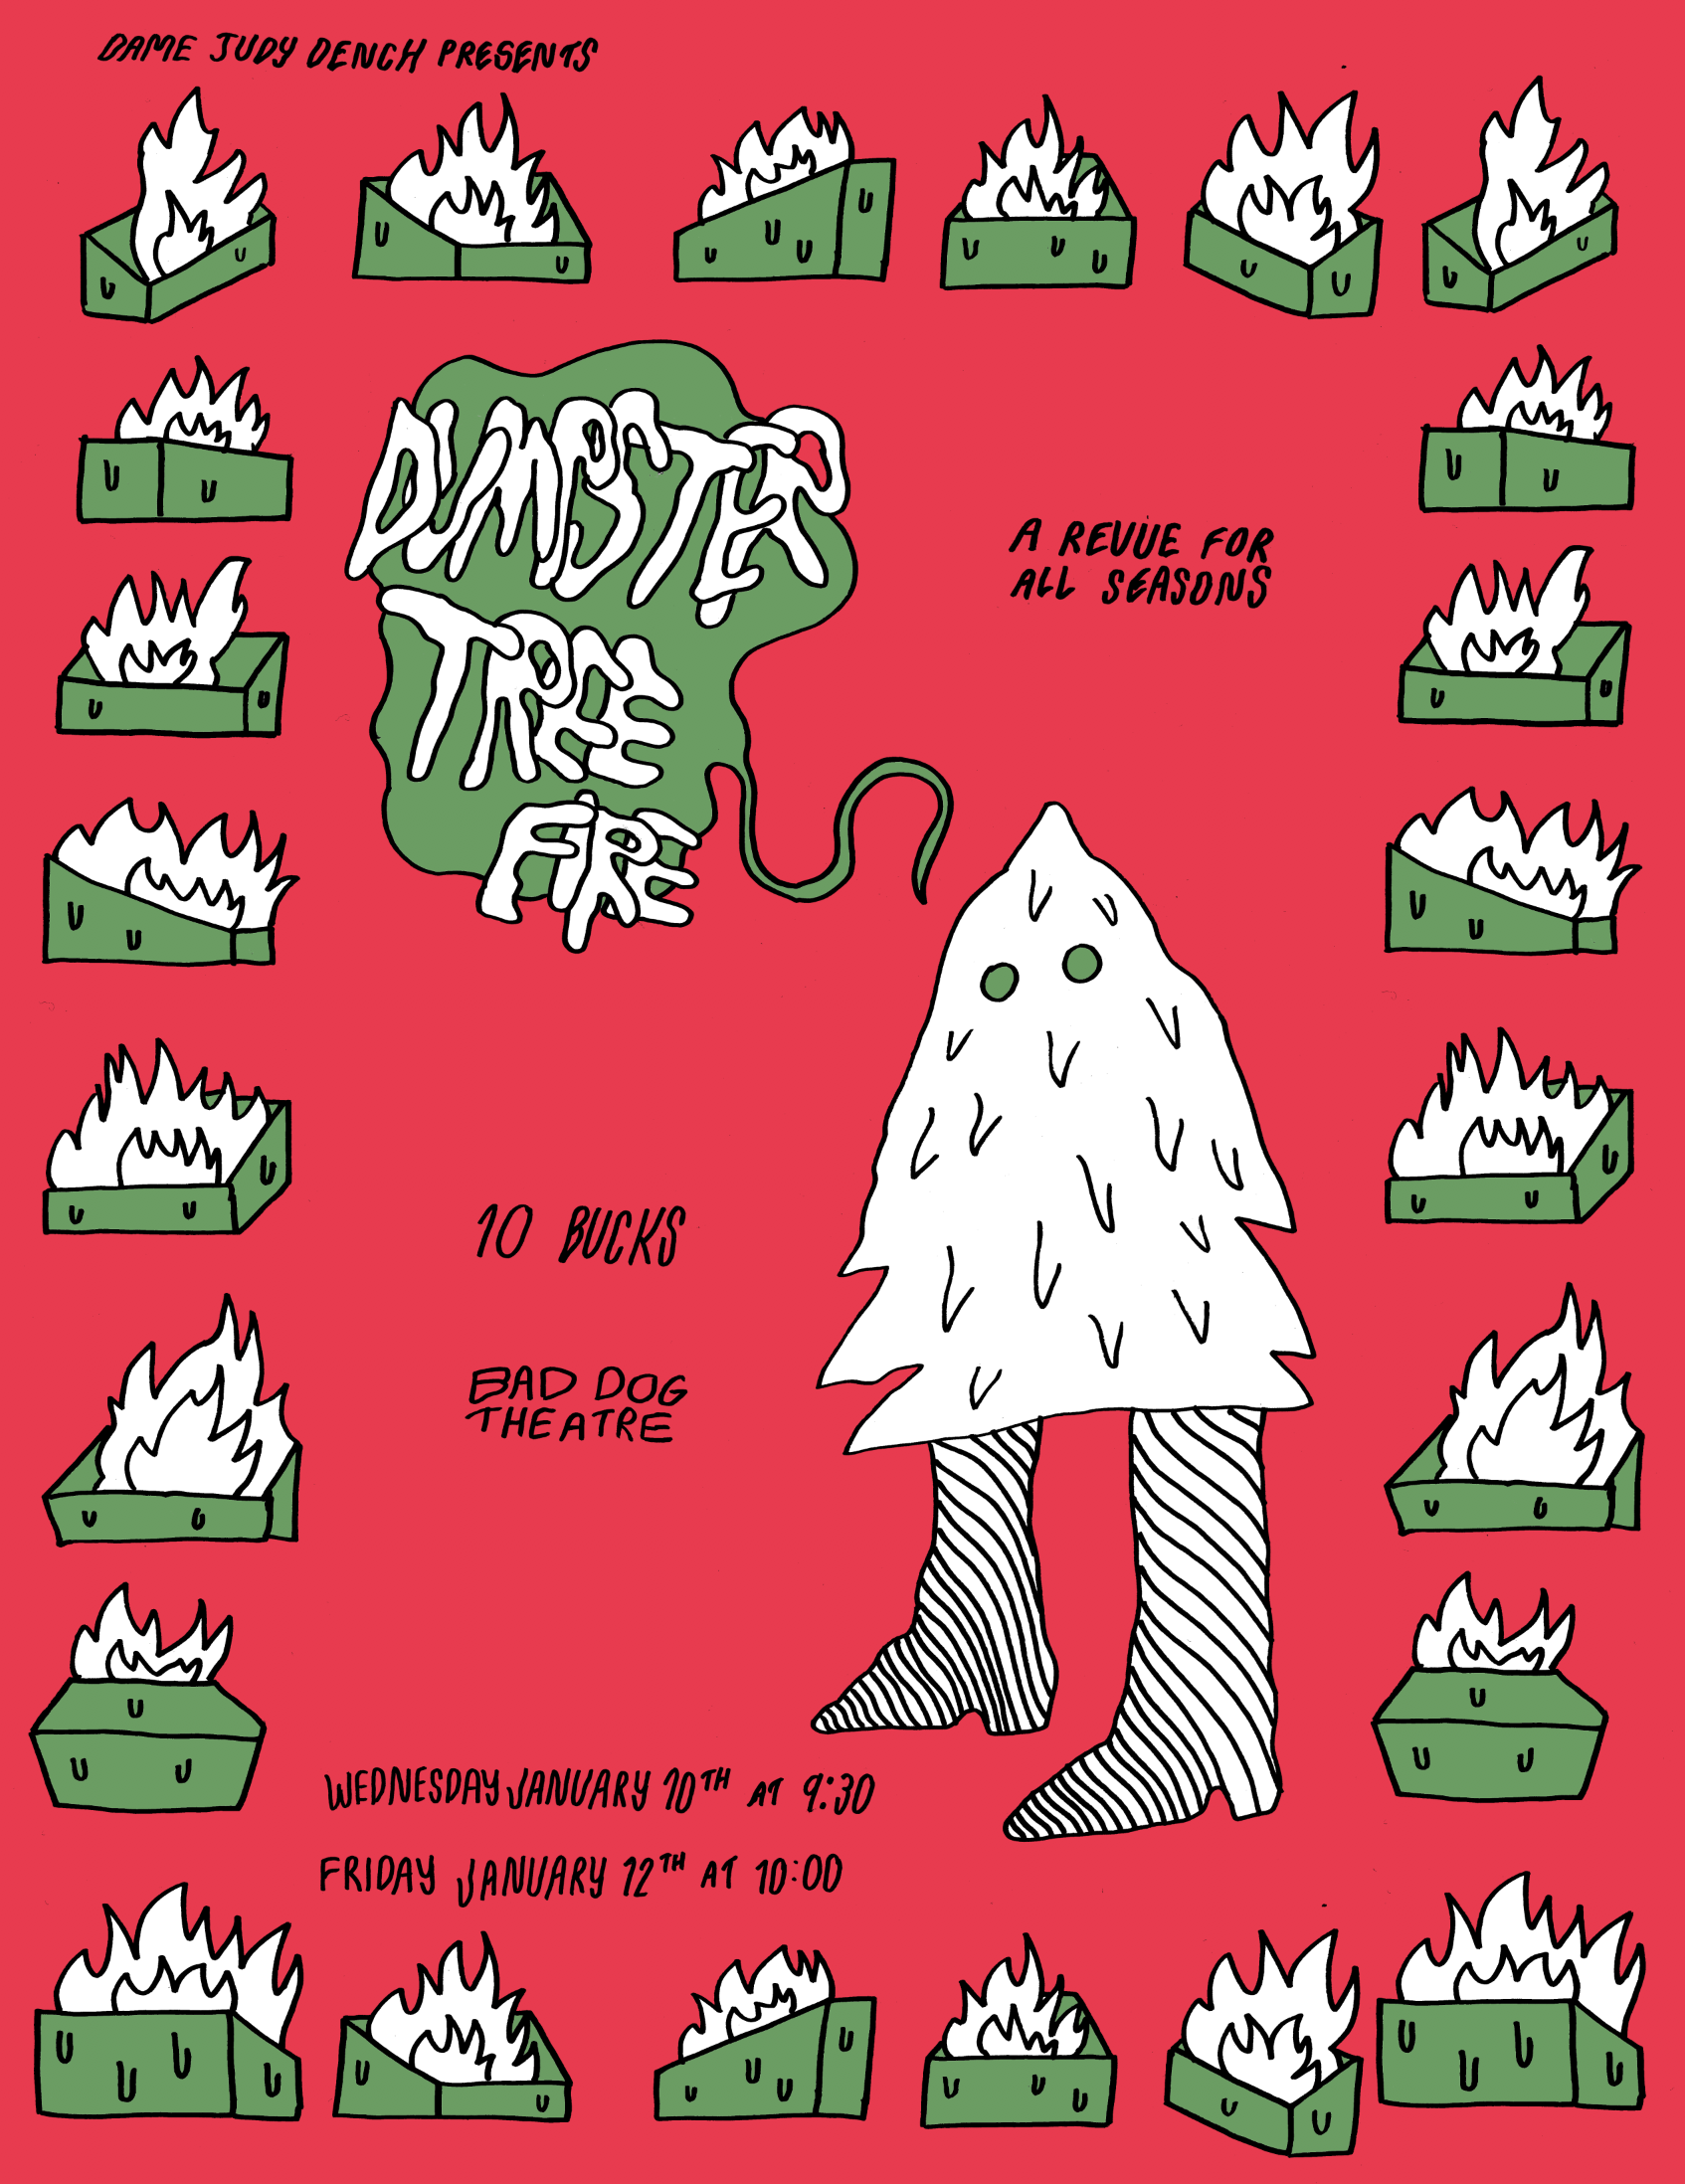 dumpster tree fire sketch show poster